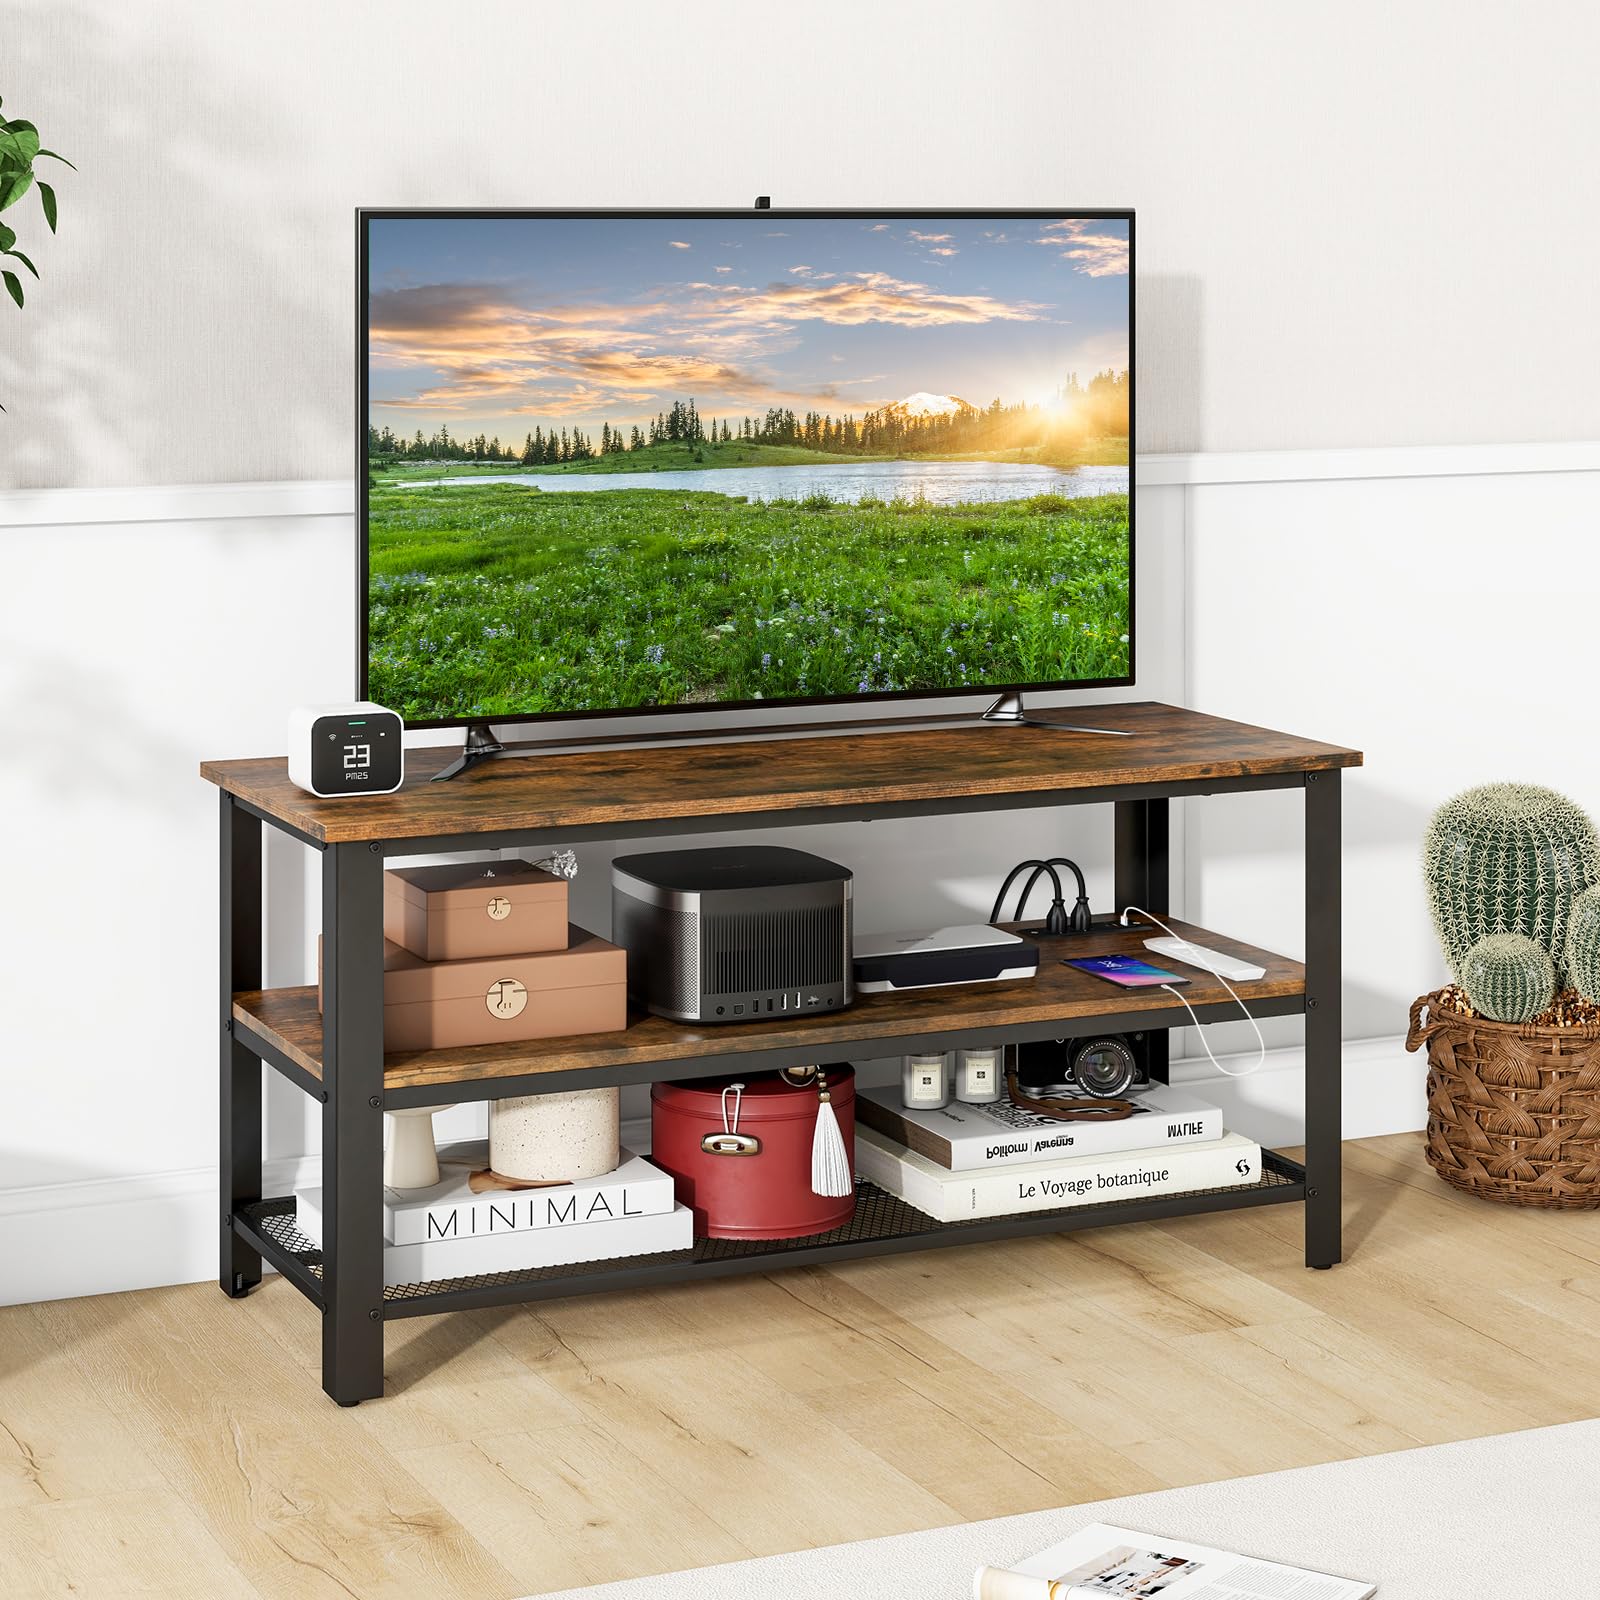 Giantex TV Stand for Bedroom, Entertainment Center for TVs up to 50”